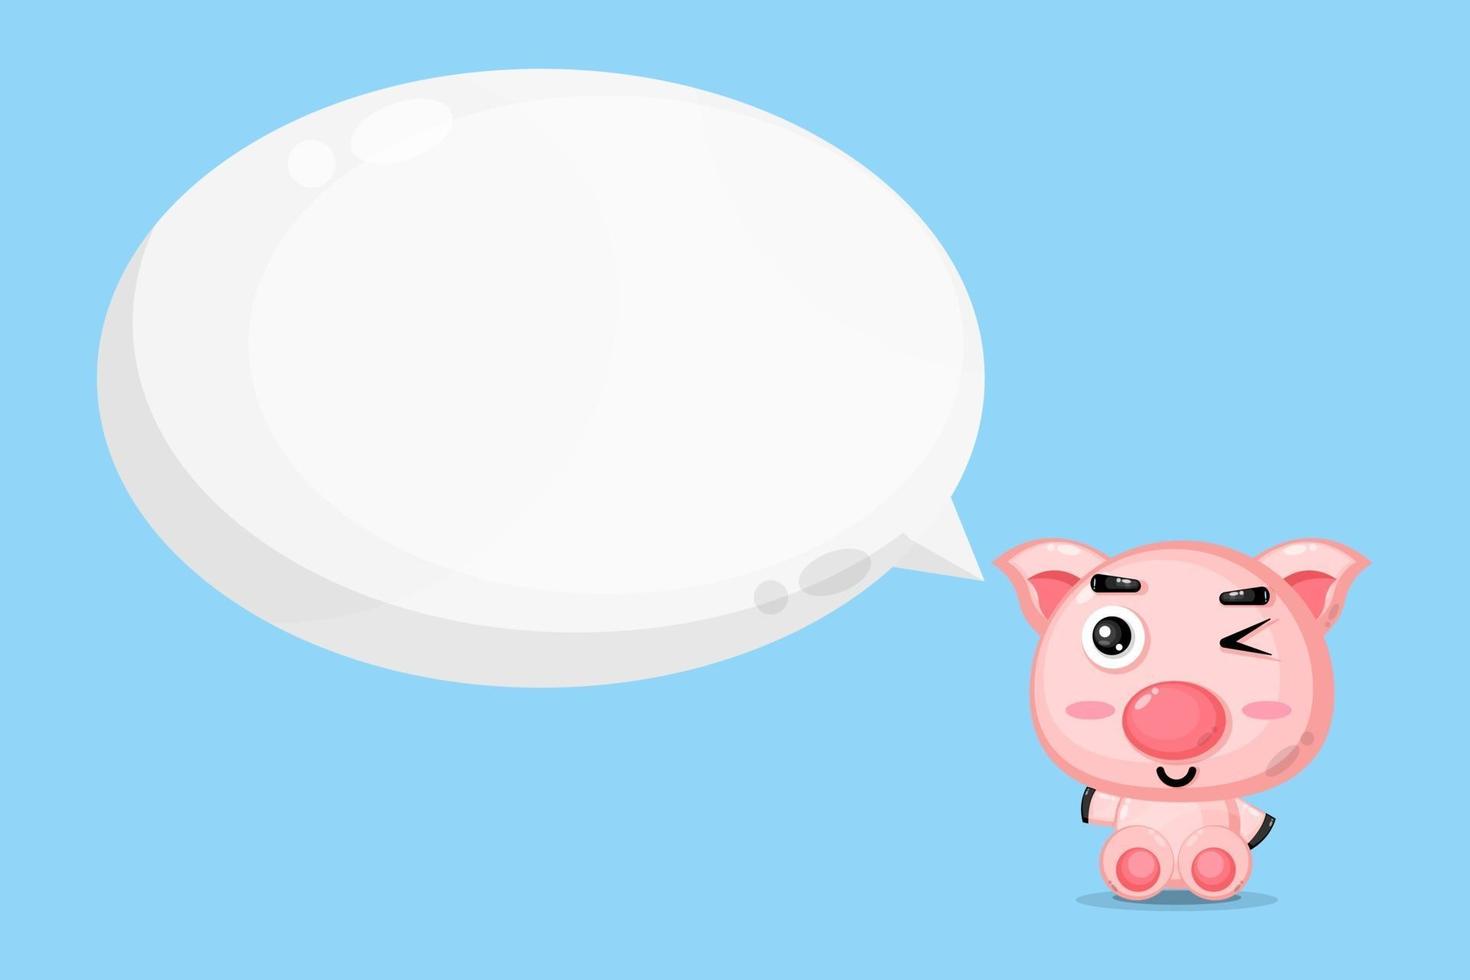 Cute pig character with bubble speech vector